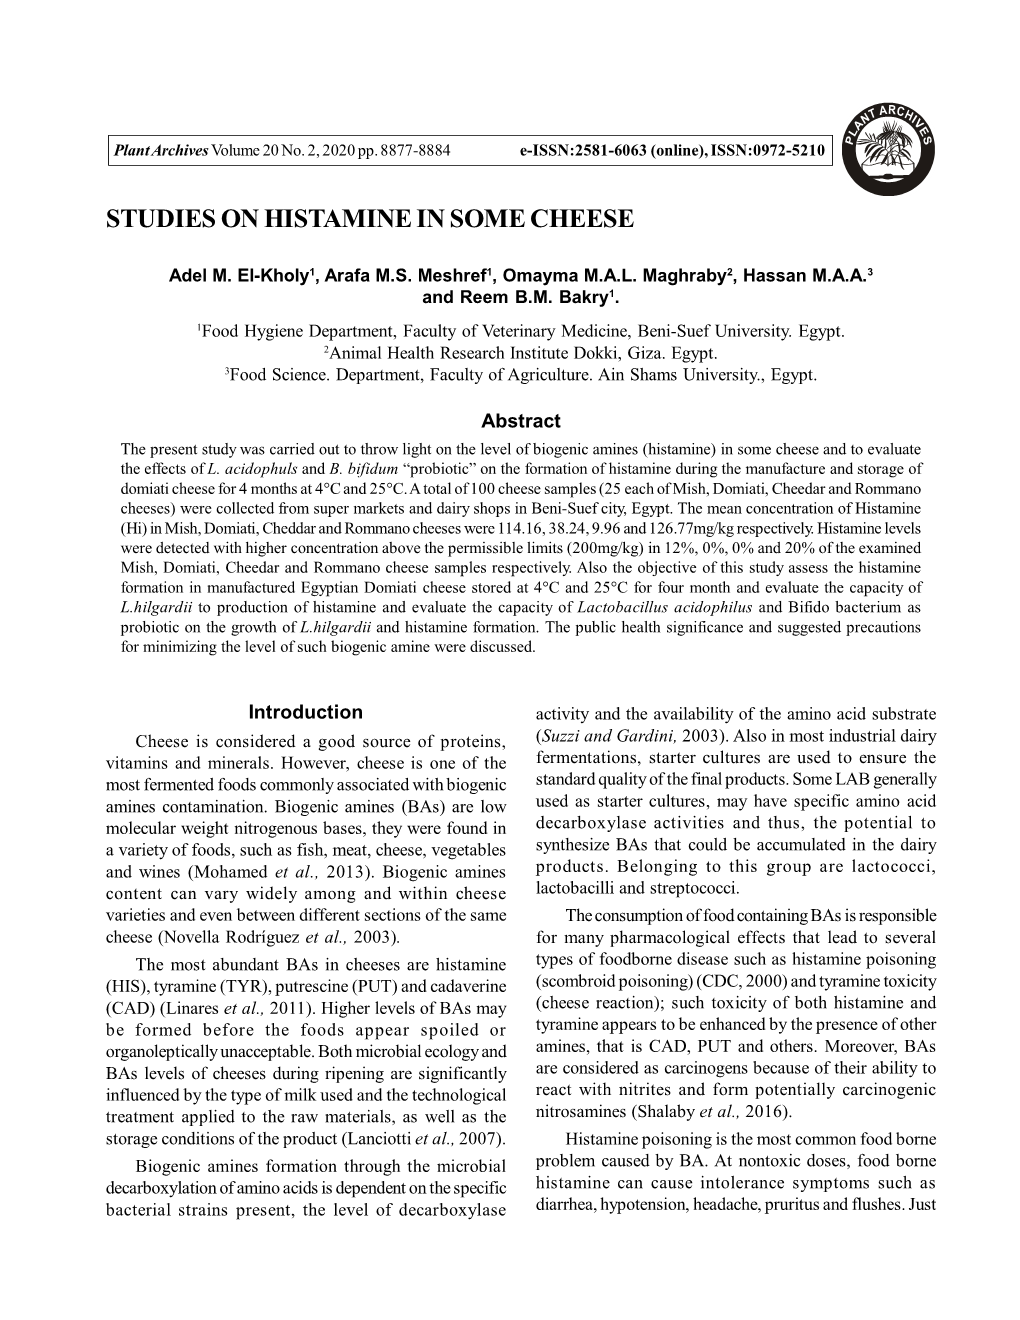 Studies on Histamine in Some Cheese